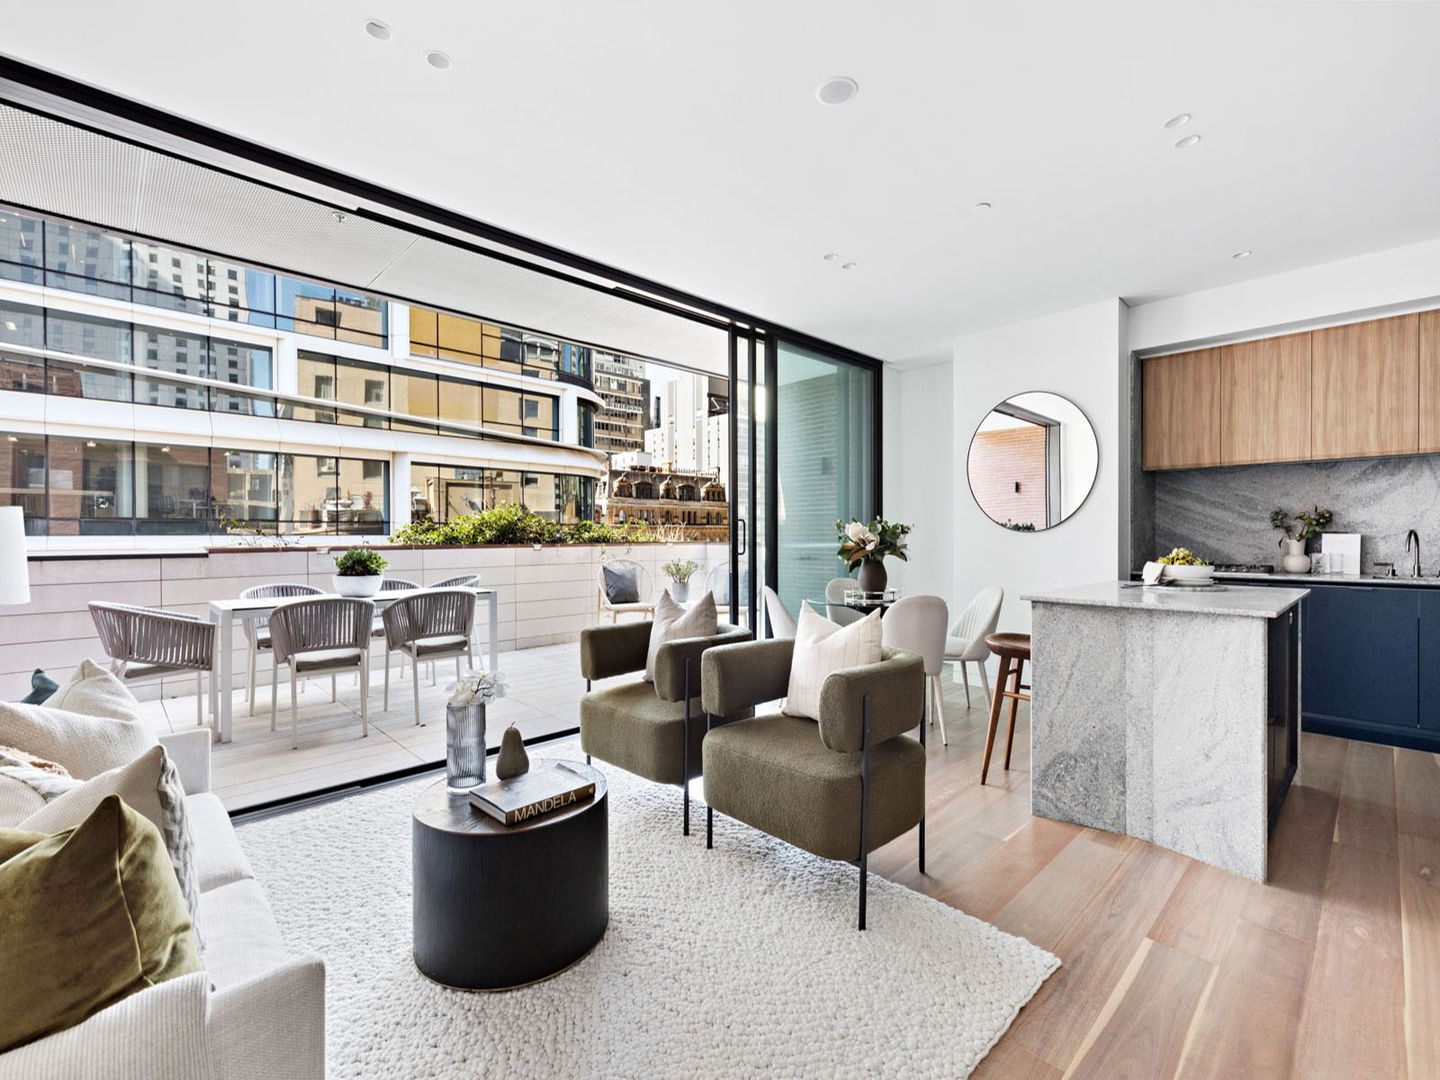 Sold C.10.04/15 Young Street, Sydney NSW 2000 on 03 Aug 2023 - 2018502546